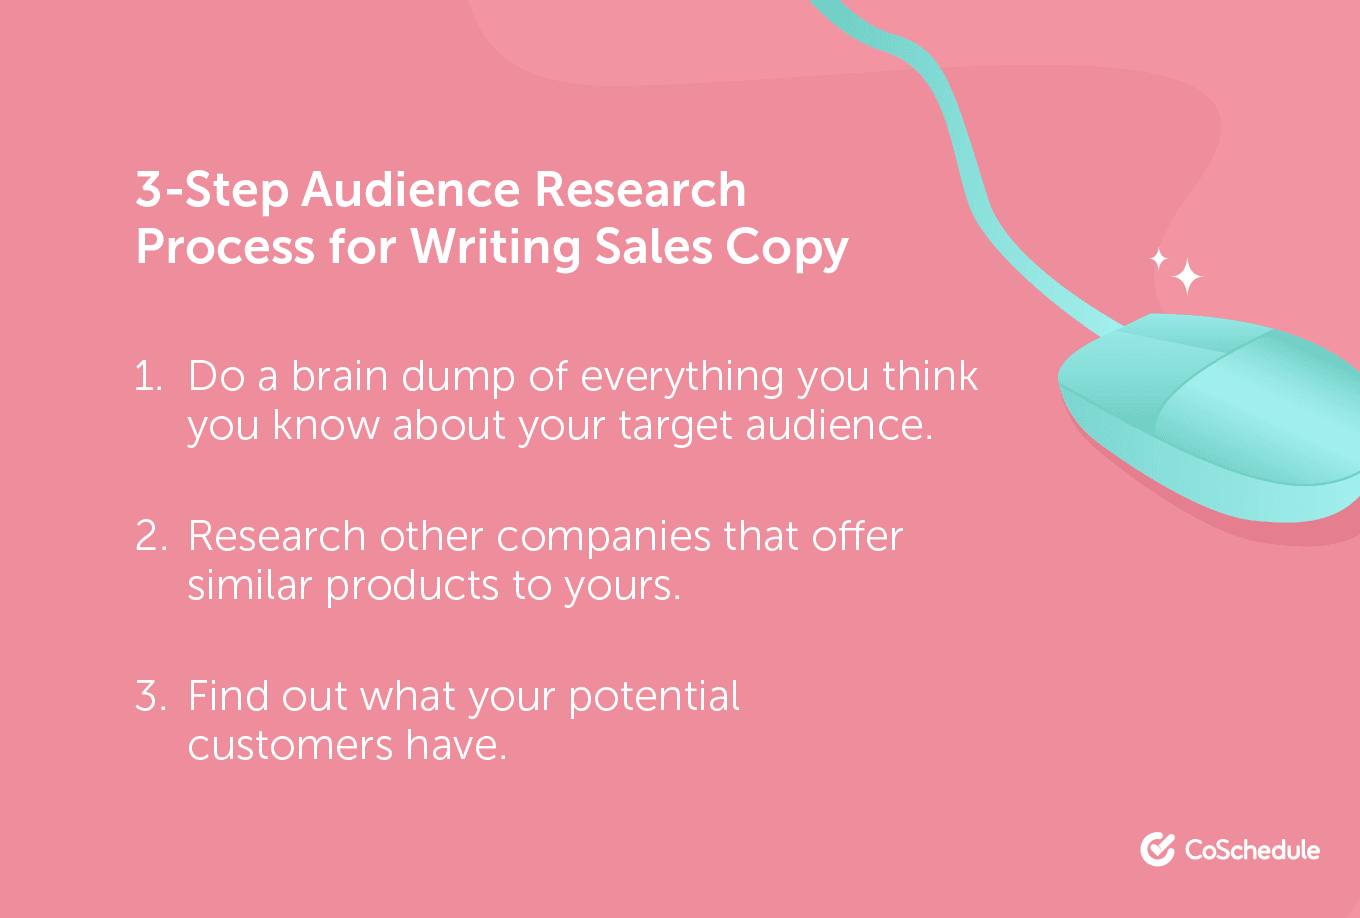 3-Step Audience Research Process for Writing Sales Copy